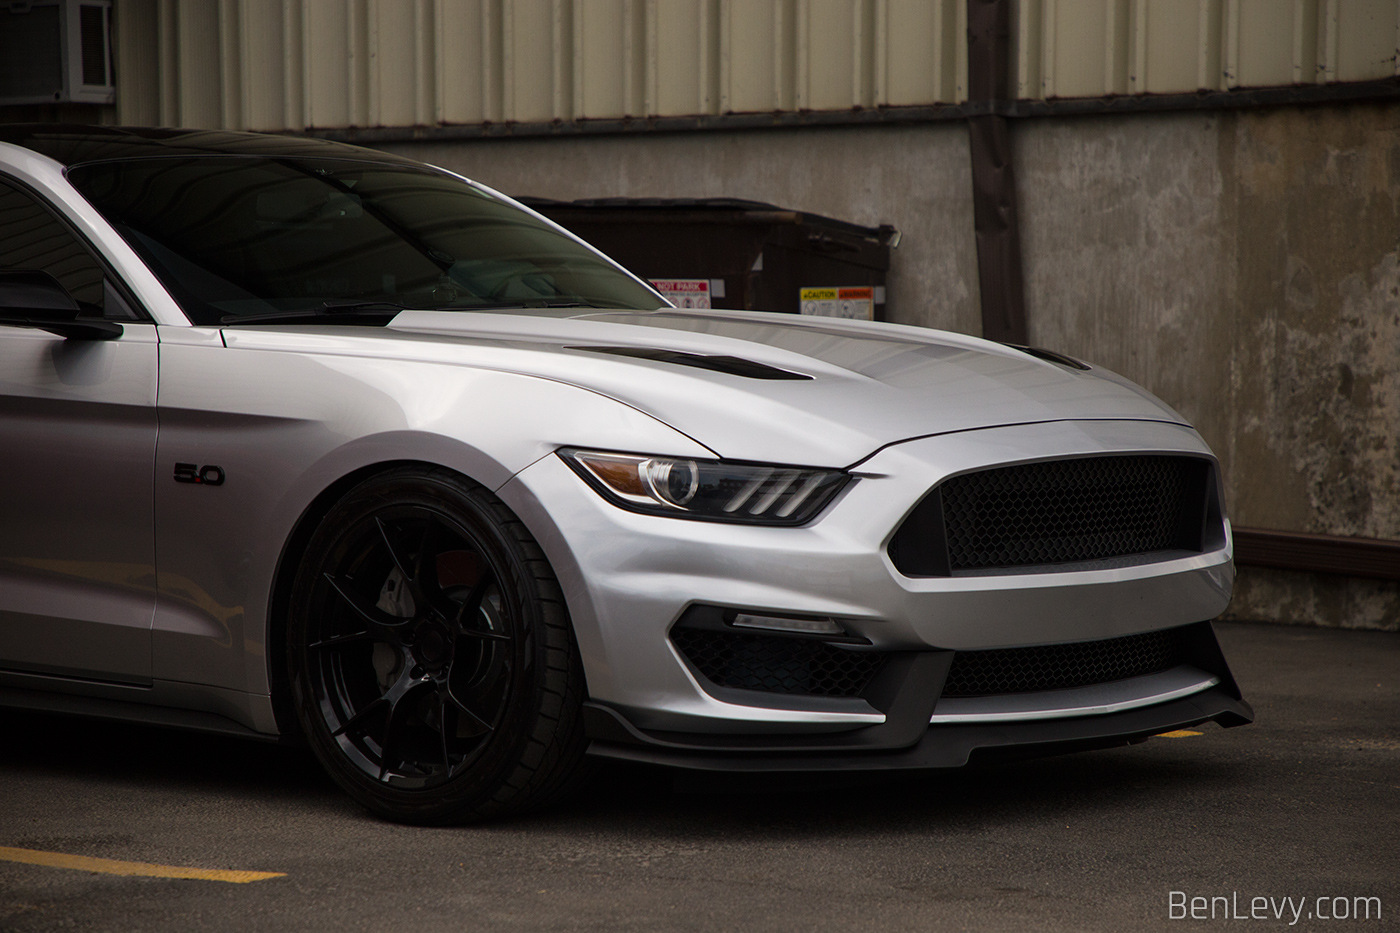 Front Quarter of S550 Mustang 5.0